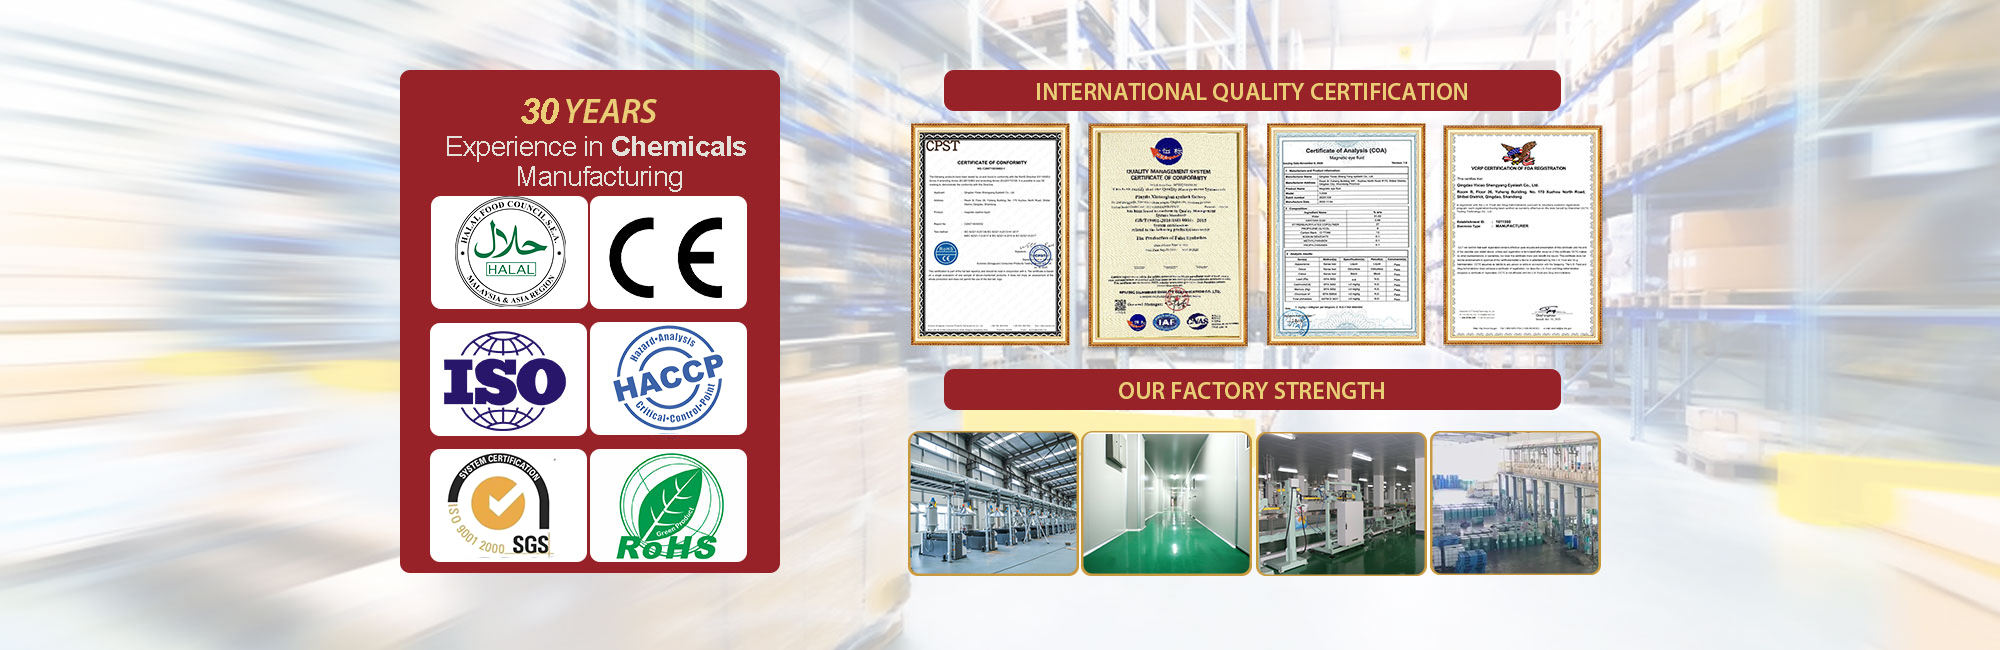 Top Supplier For Chemicals